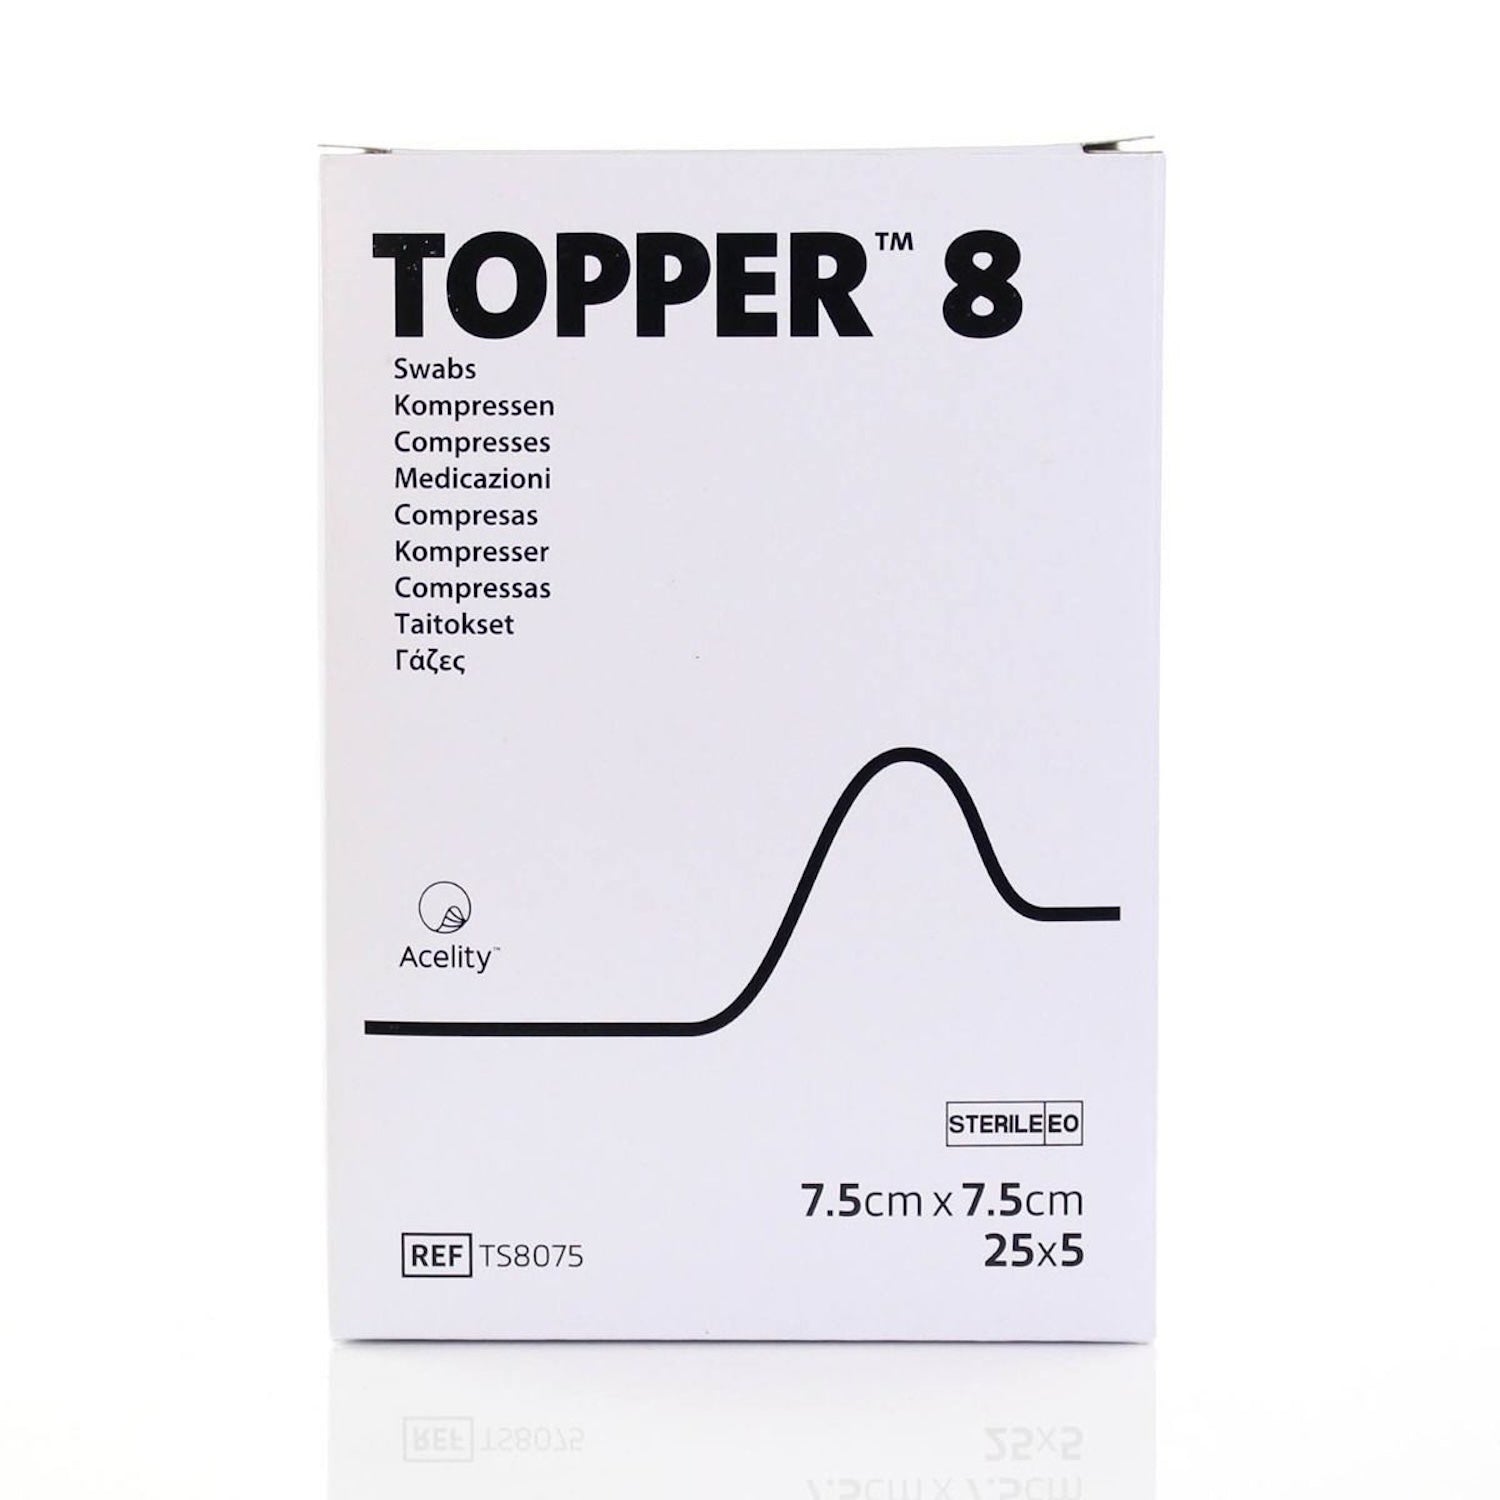 Topper 8 Gauze Swabs | Sterile | 7.5 x 7.5cm | Pack of 25 x 5